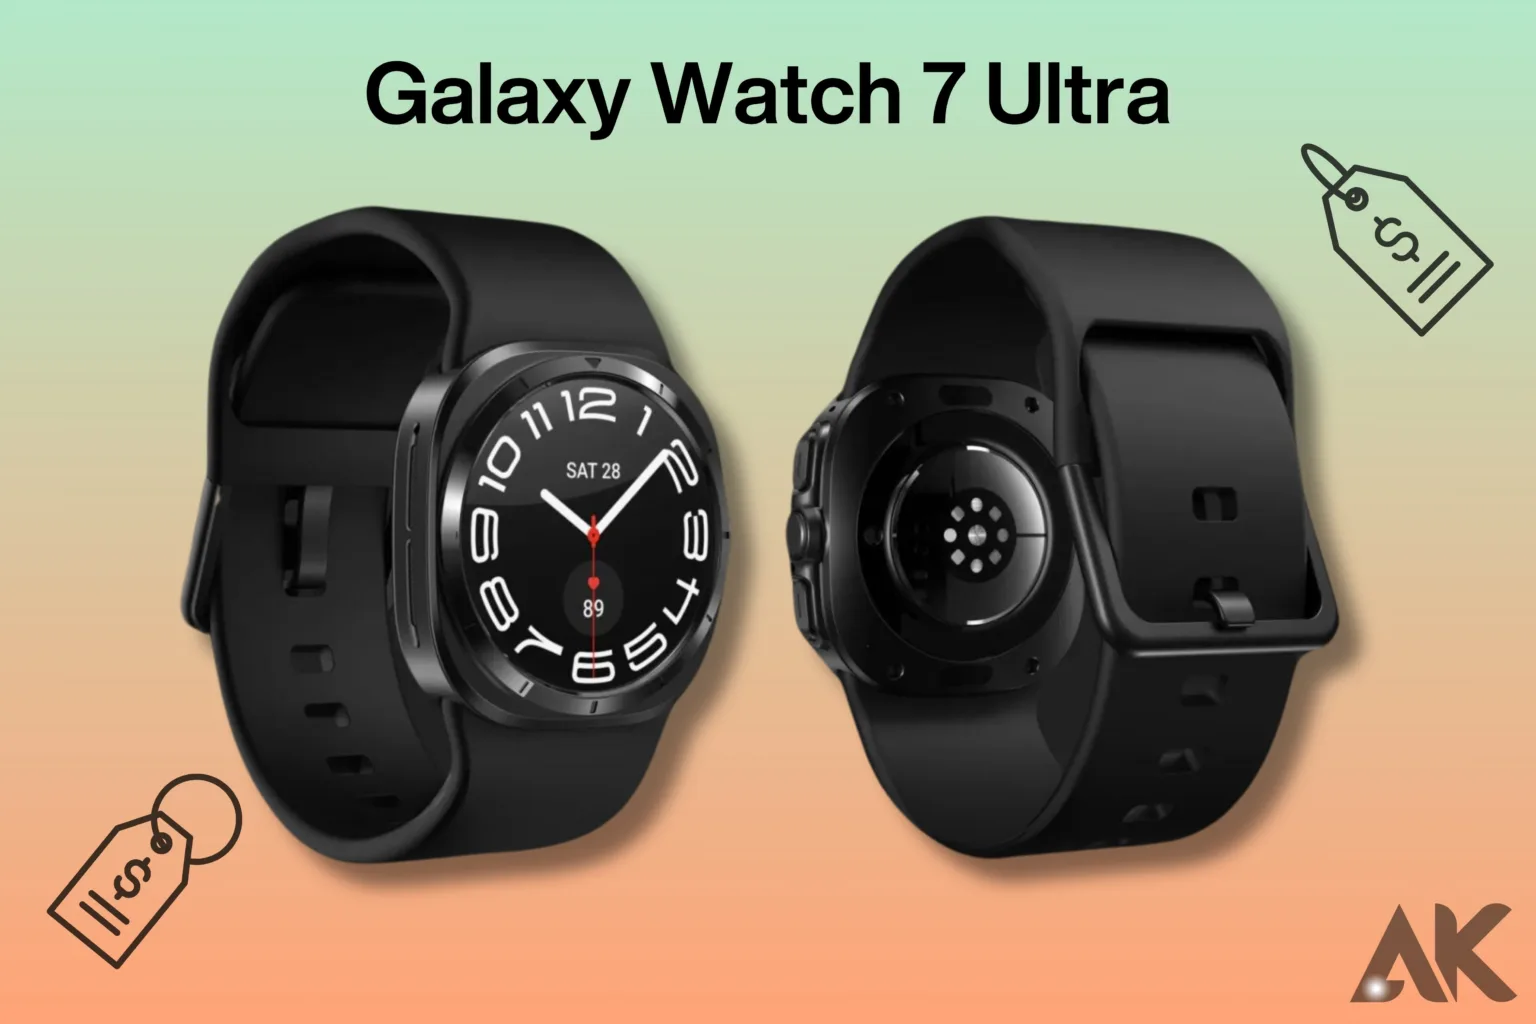 Galaxy Watch 7 Ultra Price How Much Does It Cost